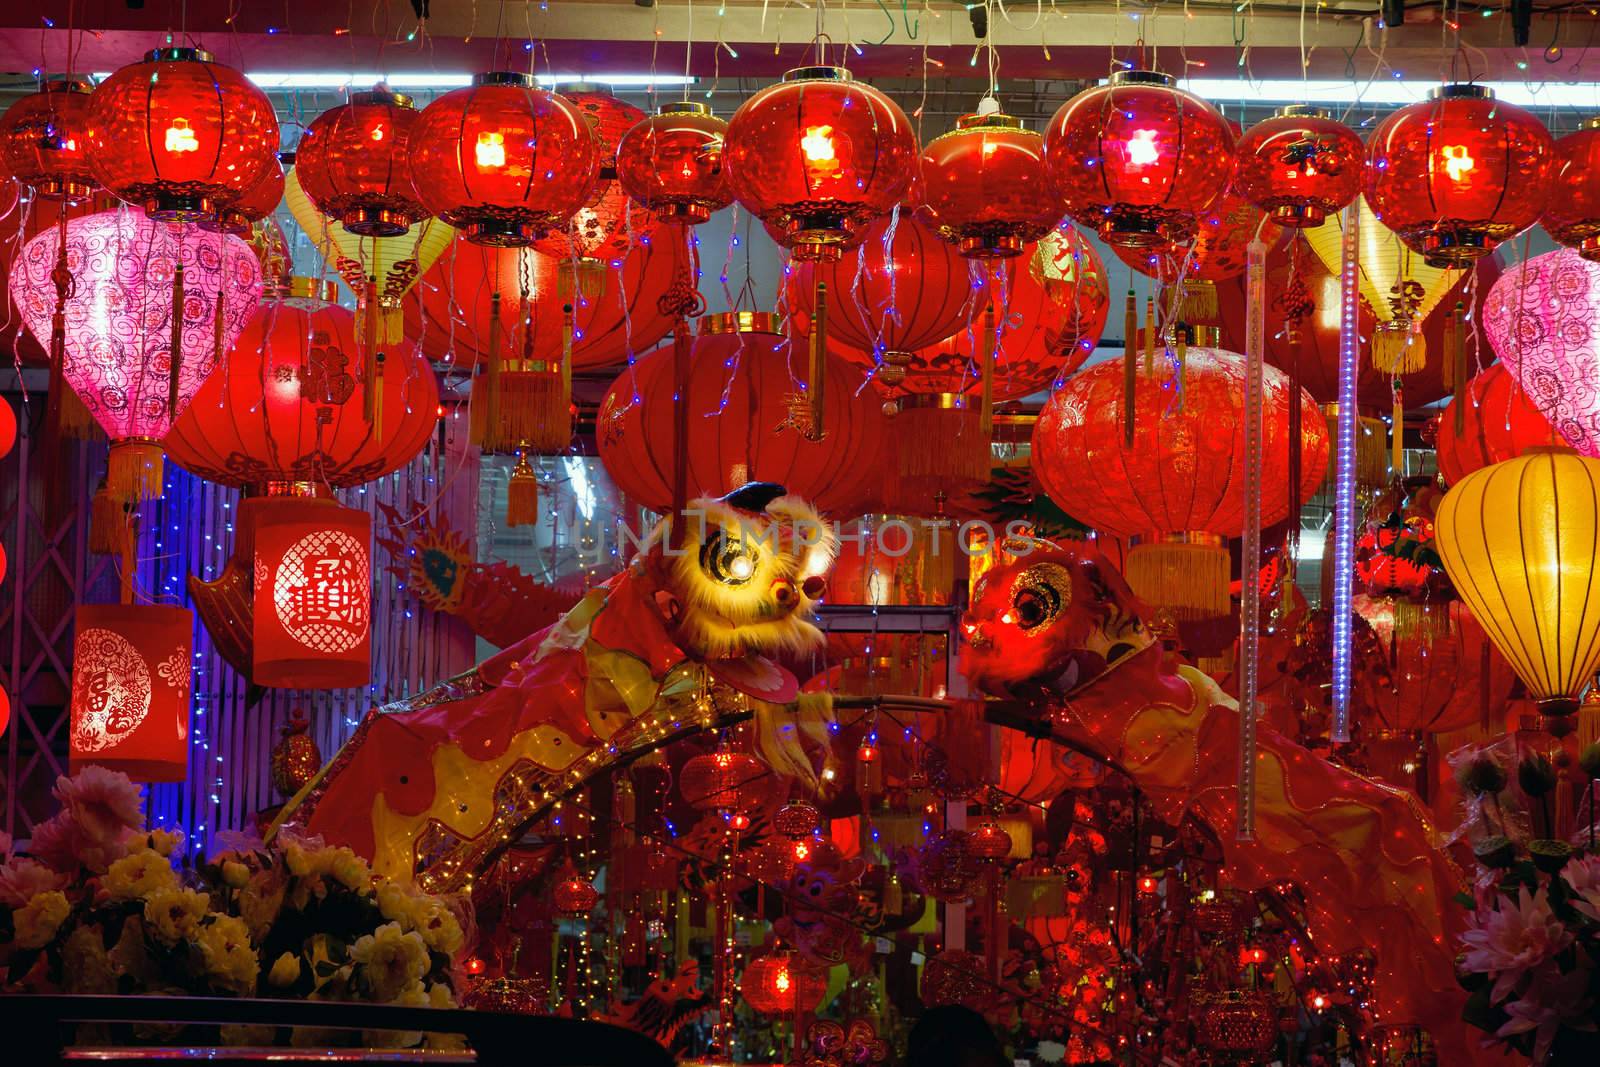 Storefront Display of Chinese New Year Lanterns by jpldesigns